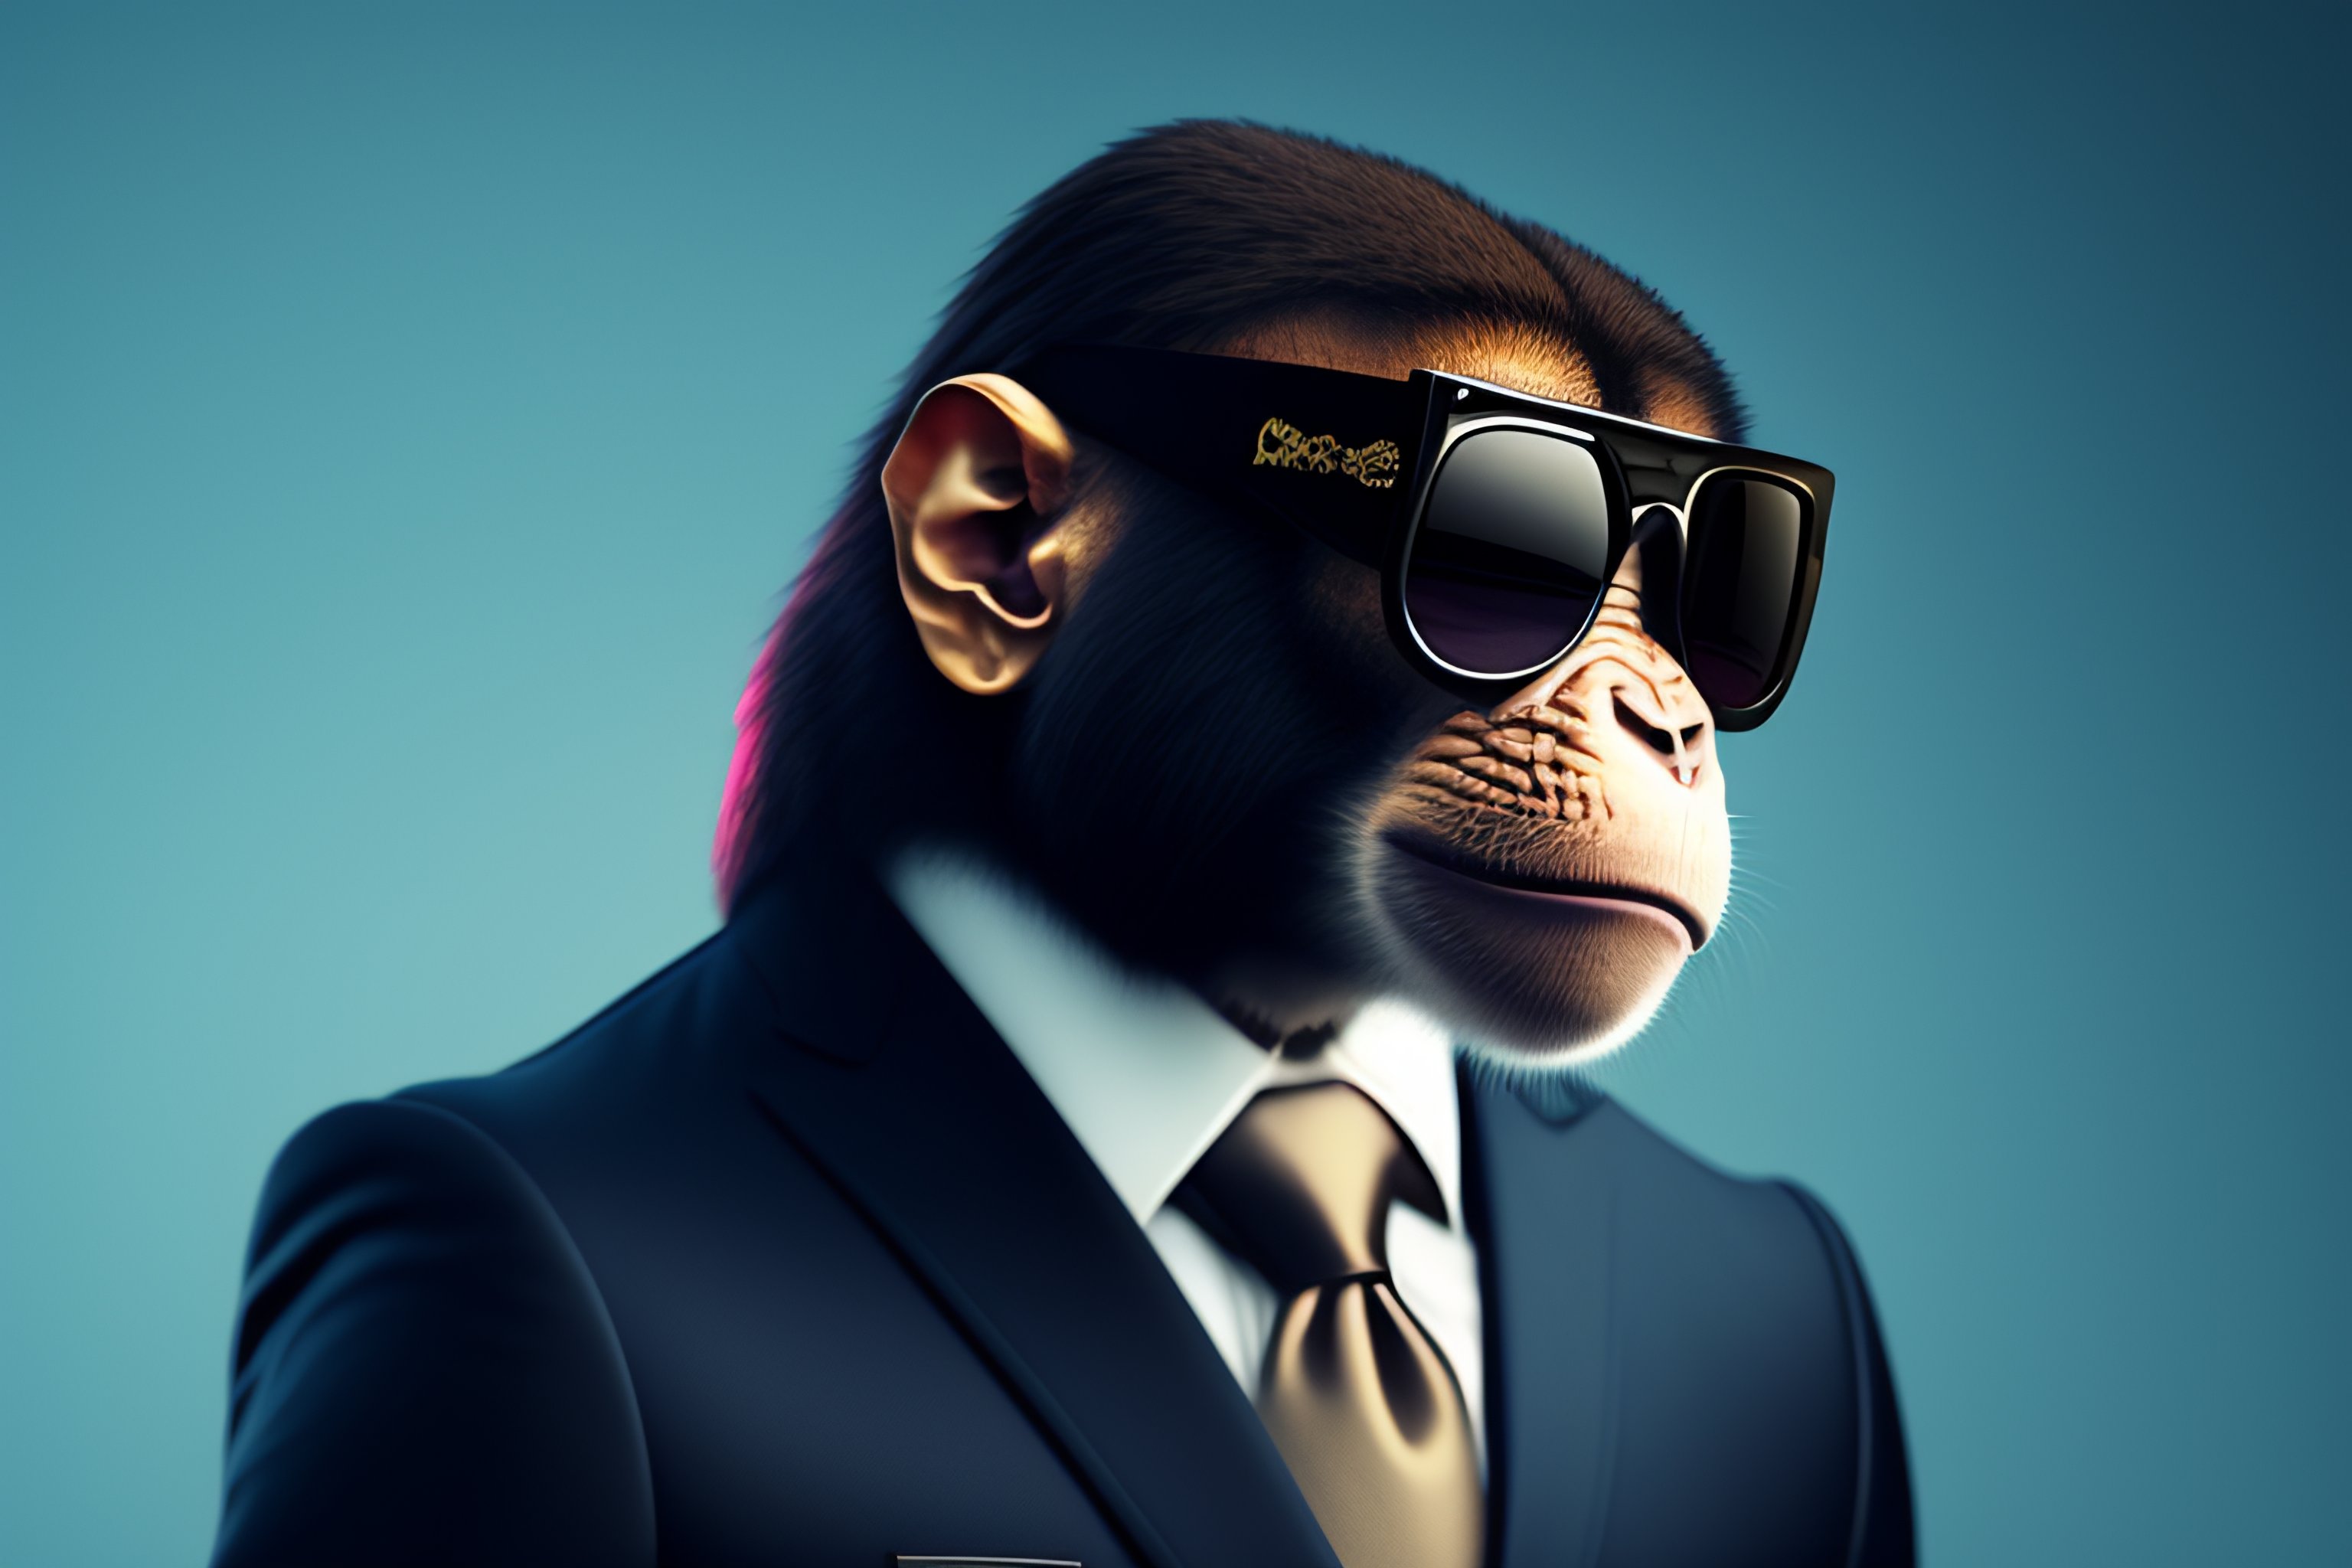 Lexica - Discord profile picture of a monkey wearing sunglasses